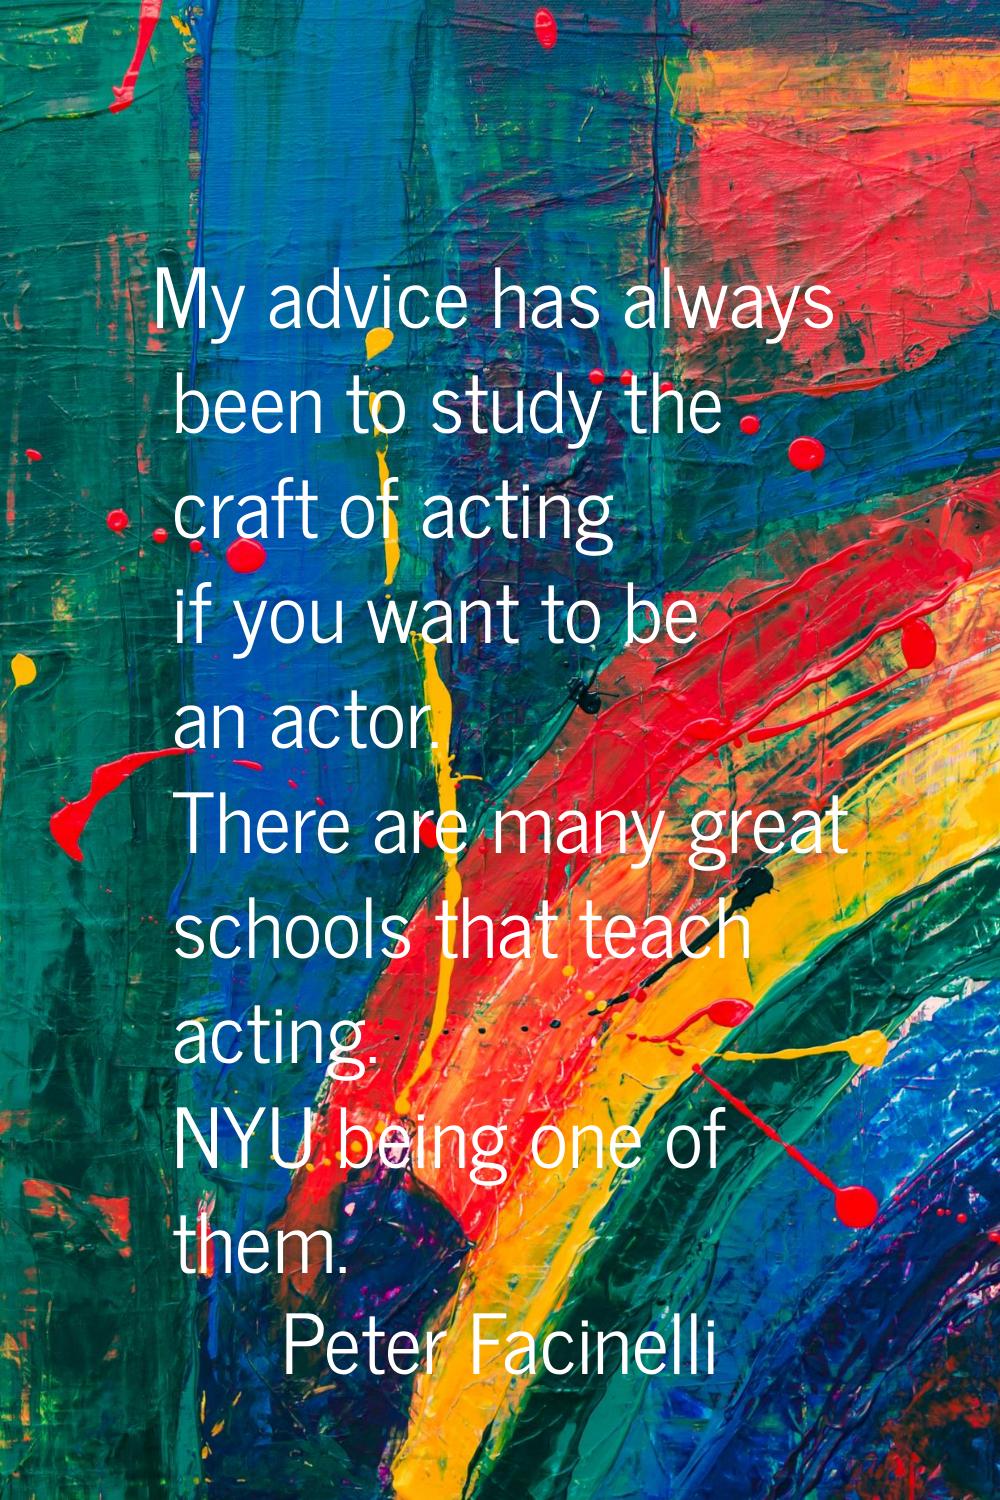 My advice has always been to study the craft of acting if you want to be an actor. There are many g